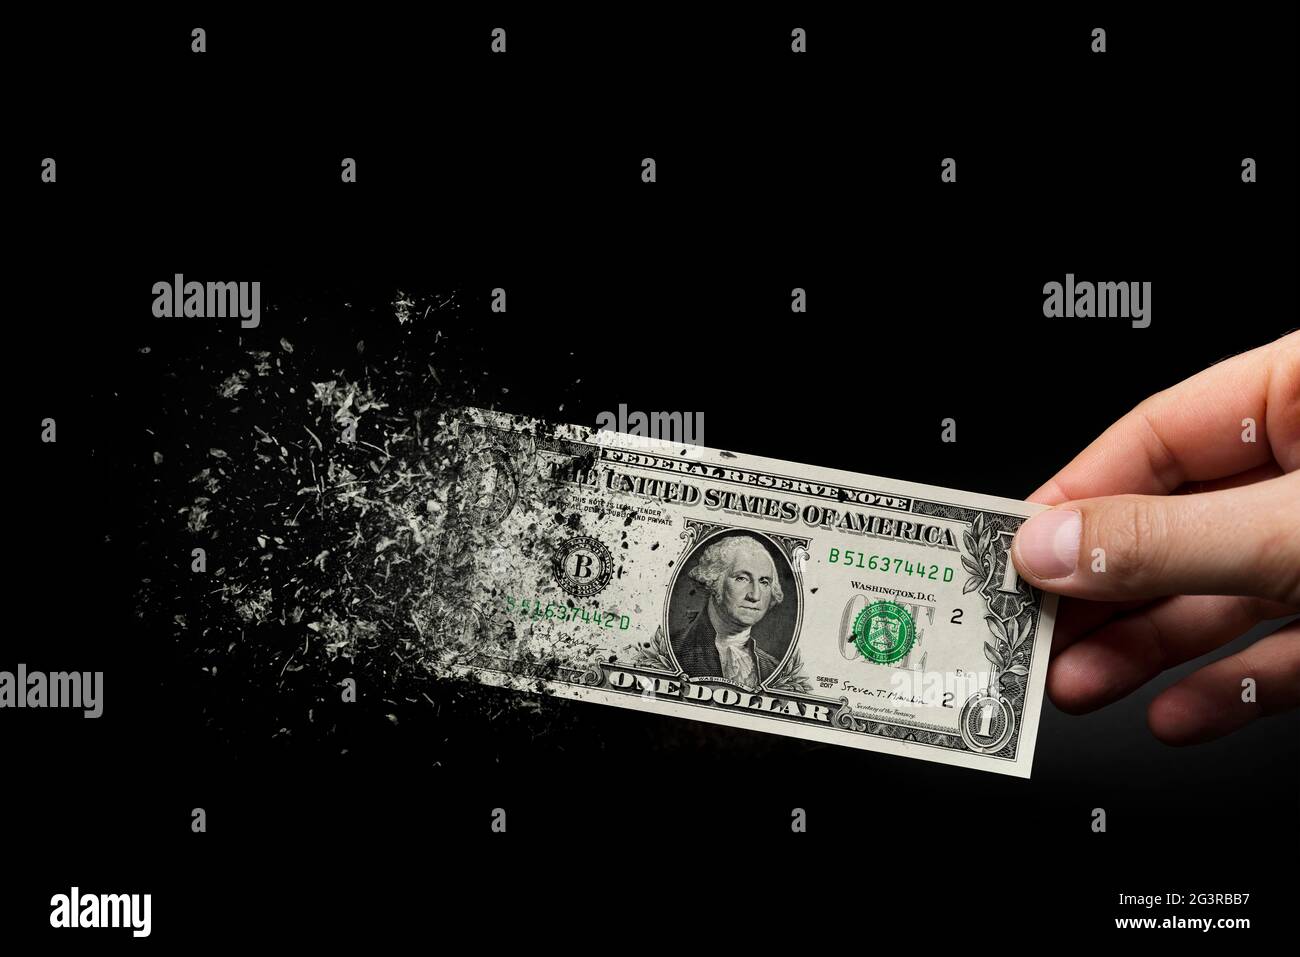 Inflation, dollar hyperinflation with black background. One dollar bill is sprayed in the hand of a man on a black background. The concept of decreasi Stock Photo